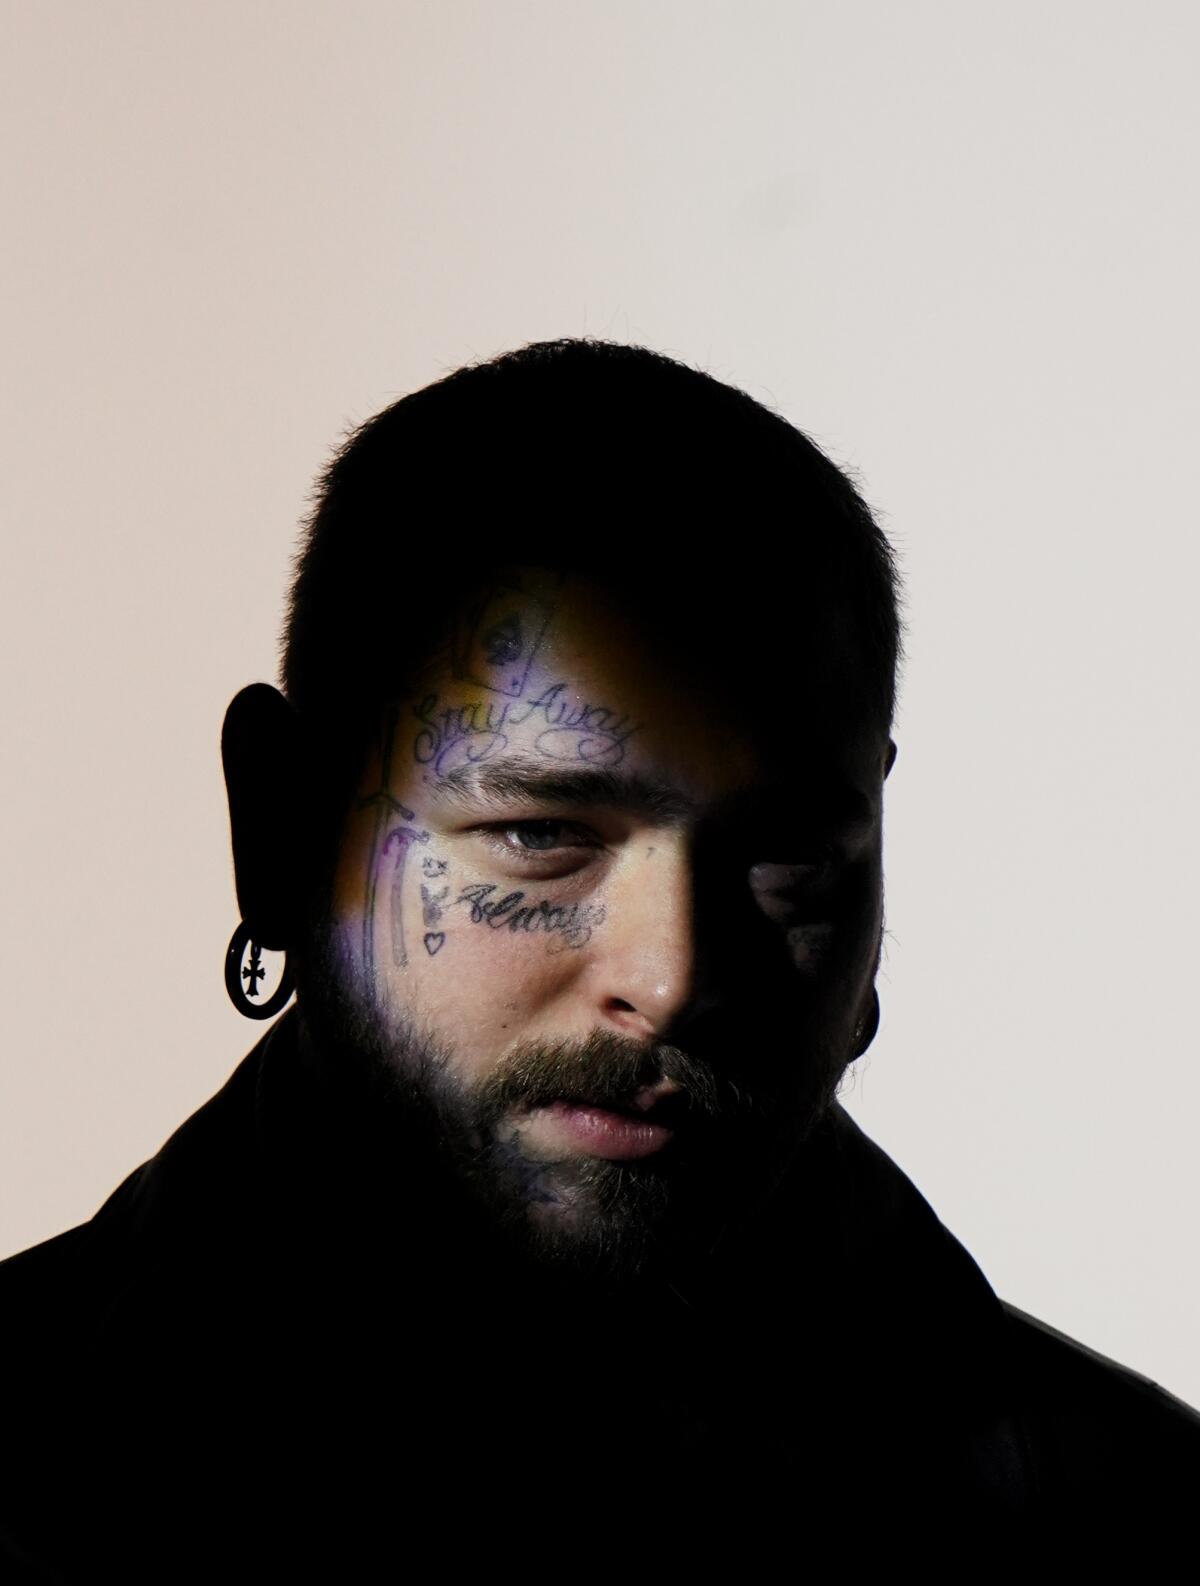 A man with short cropped hair, beard and face tattoos